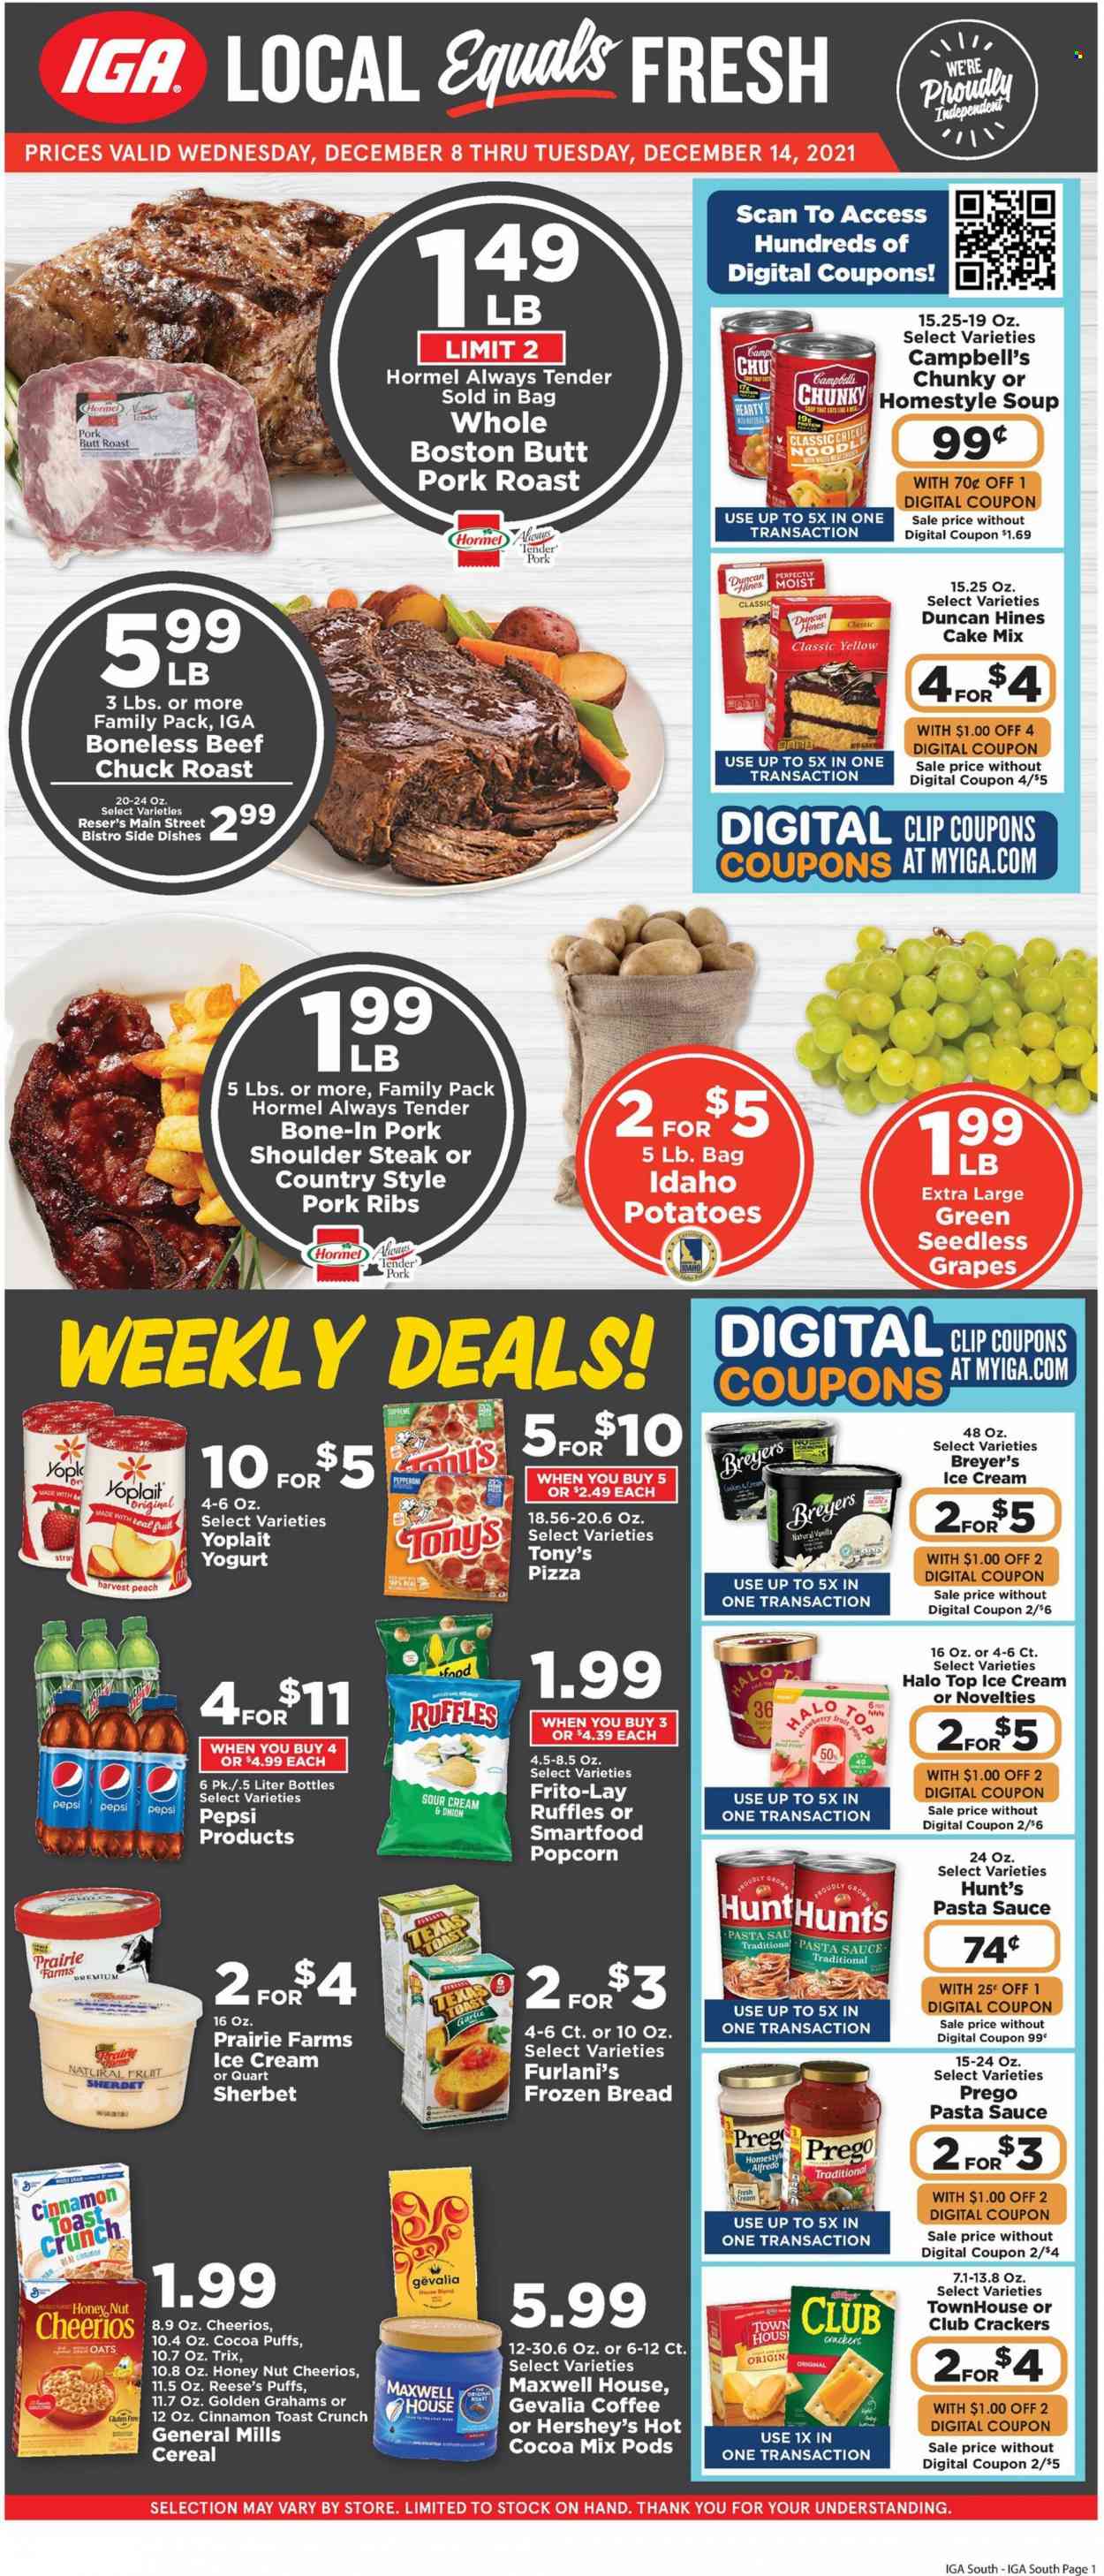 thumbnail - IGA Flyer - 12/08/2021 - 12/14/2021 - Sales products - seedless grapes, bread, puffs, cake mix, garlic, potatoes, grapes, Campbell's, pizza, pasta sauce, soup, sauce, Hormel, pepperoni, Yoplait, sour cream, ice cream, sherbet, Reese's, Hershey's, cookies, crackers, Smartfood, popcorn, Frito-Lay, Ruffles, oats, cereals, Cheerios, Trix, cinnamon, Pepsi, hot cocoa, Maxwell House, coffee, Gevalia, beef meat, steak, chuck roast, pork meat, pork ribs, pork roast, pork shoulder, cup. Page 1.